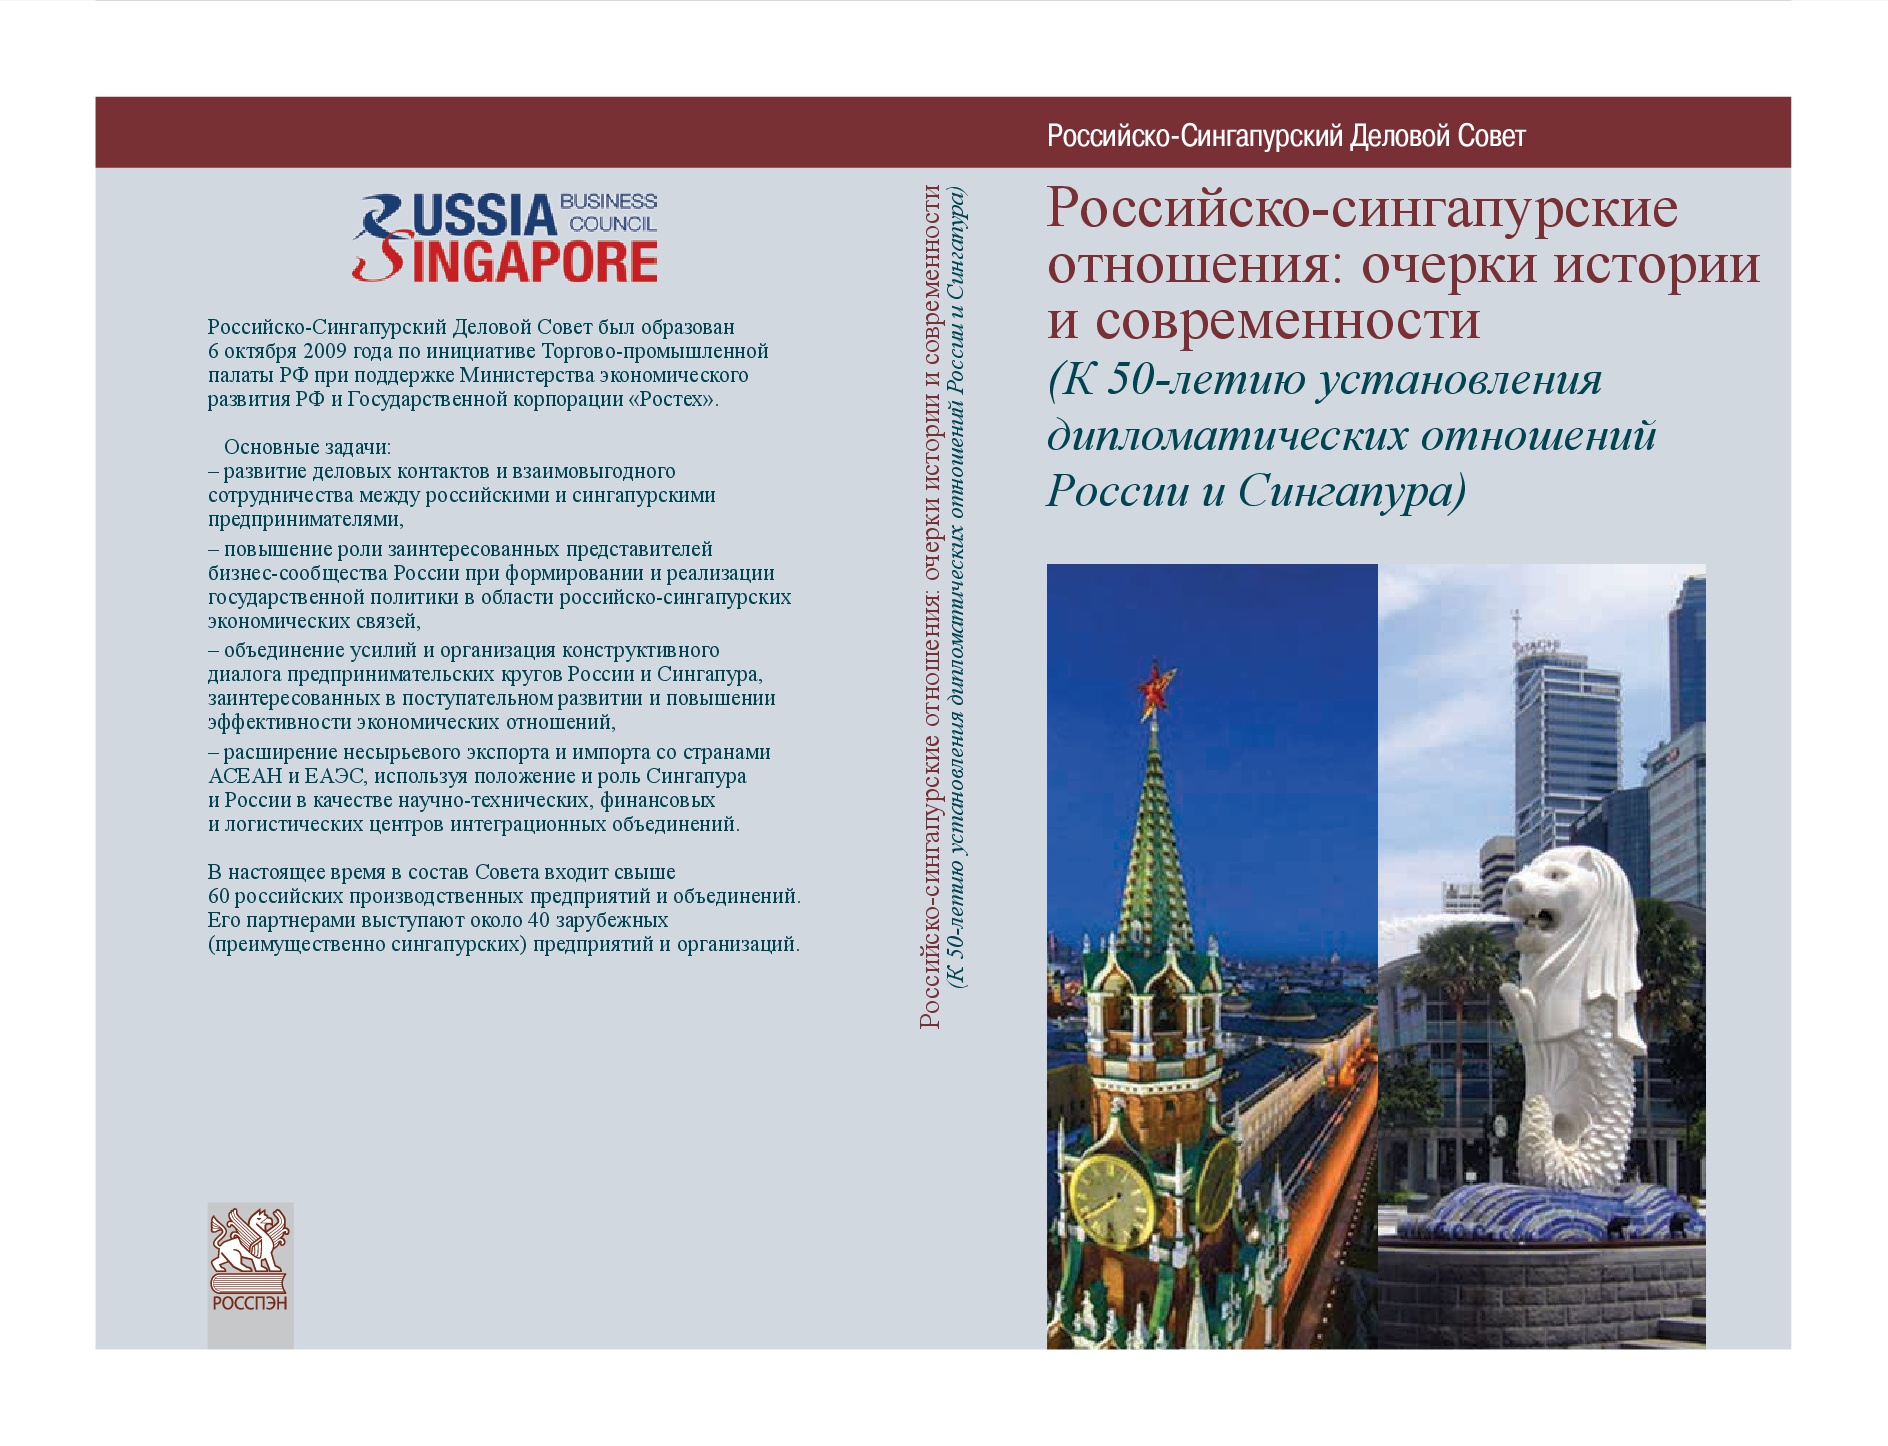 Russia-Singapore Relations: Essays on History and Modernity